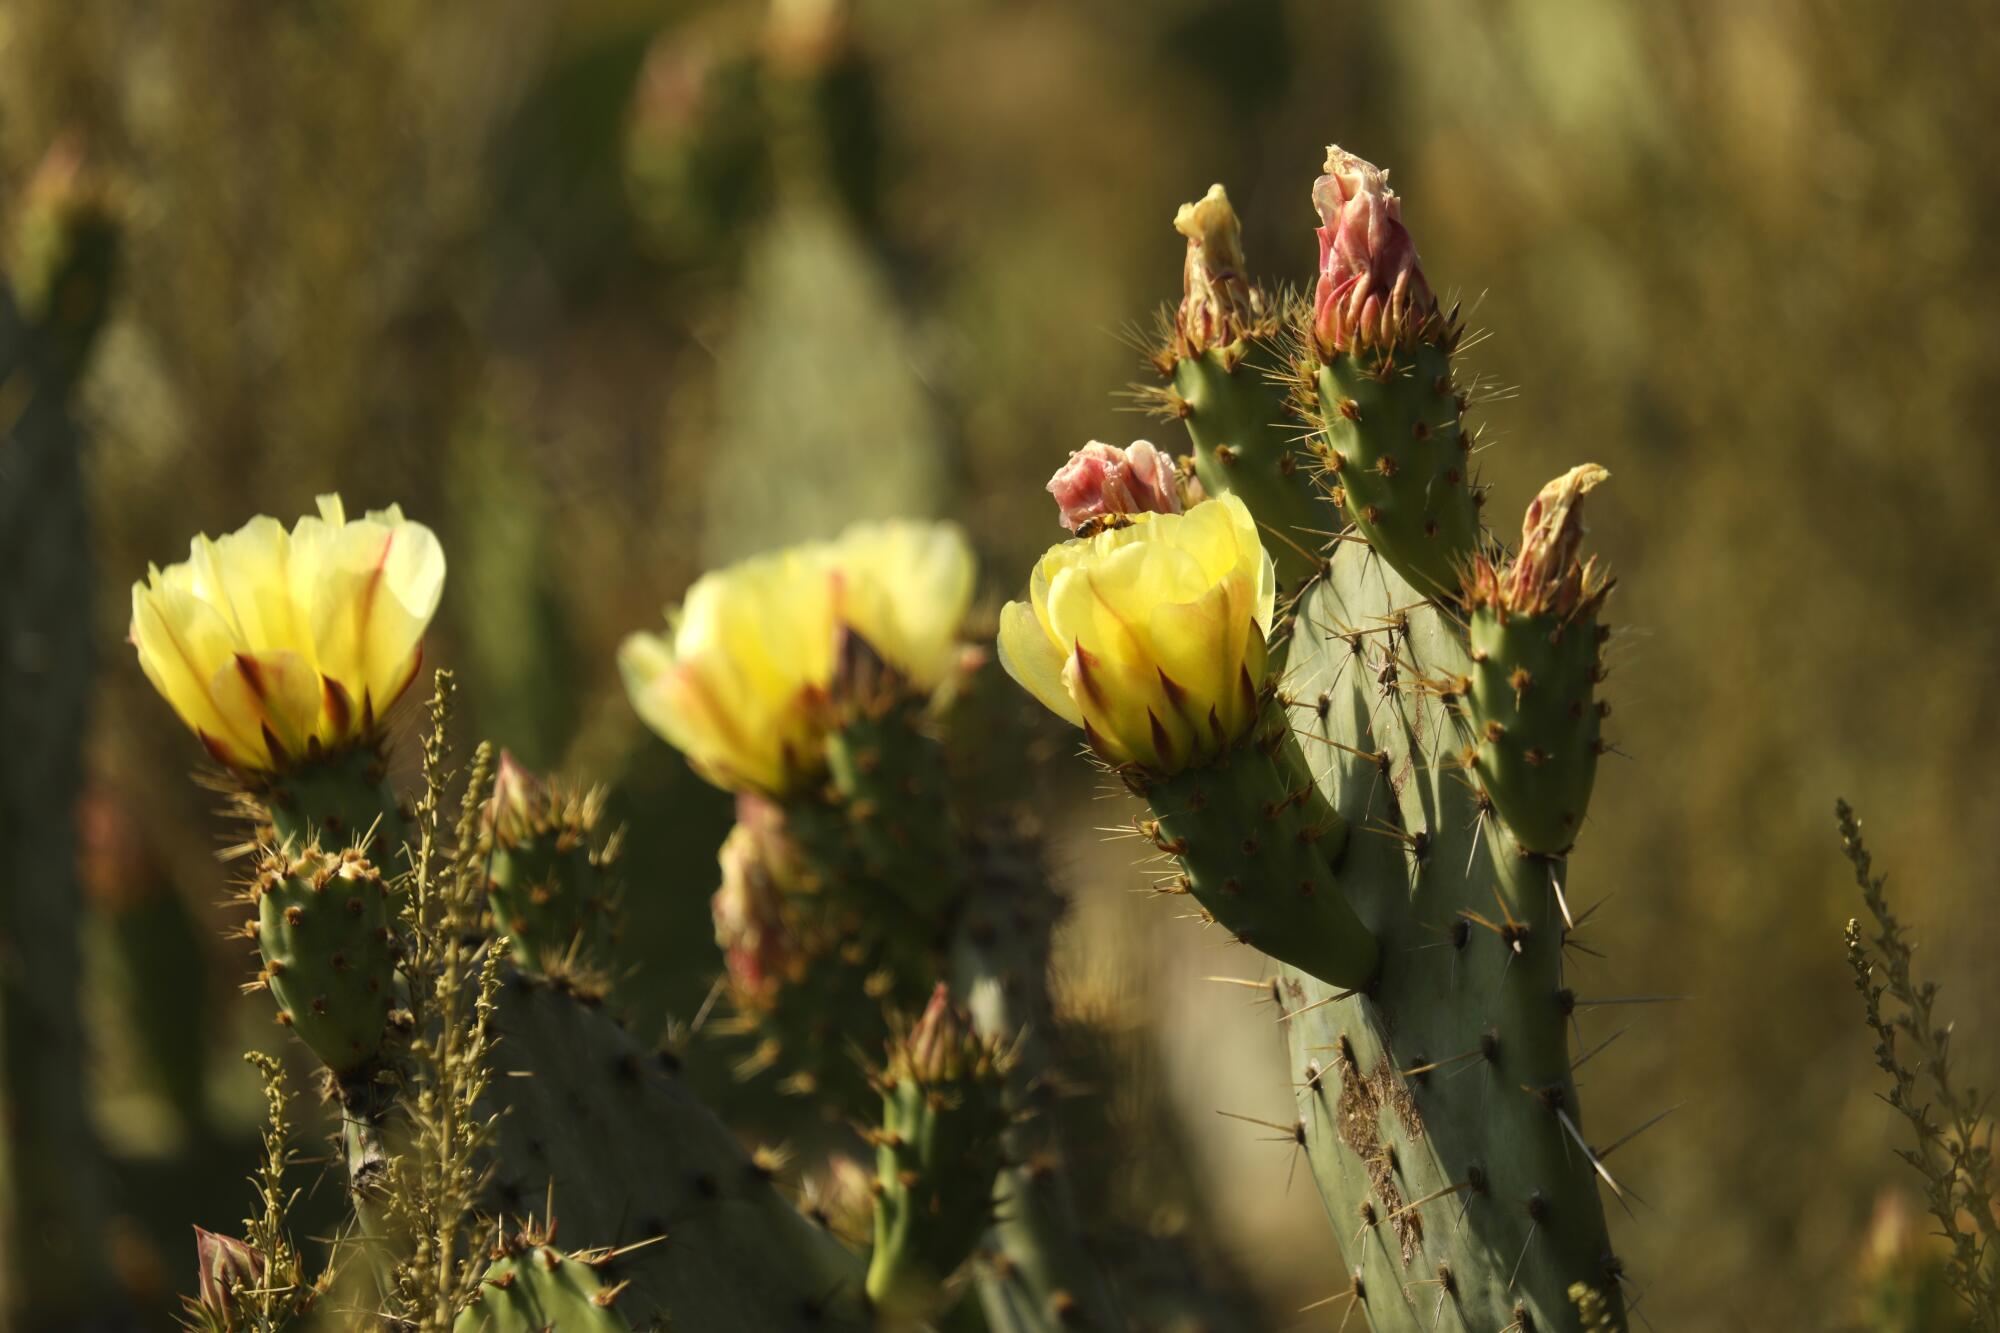 Prickly pear cactus in bloom